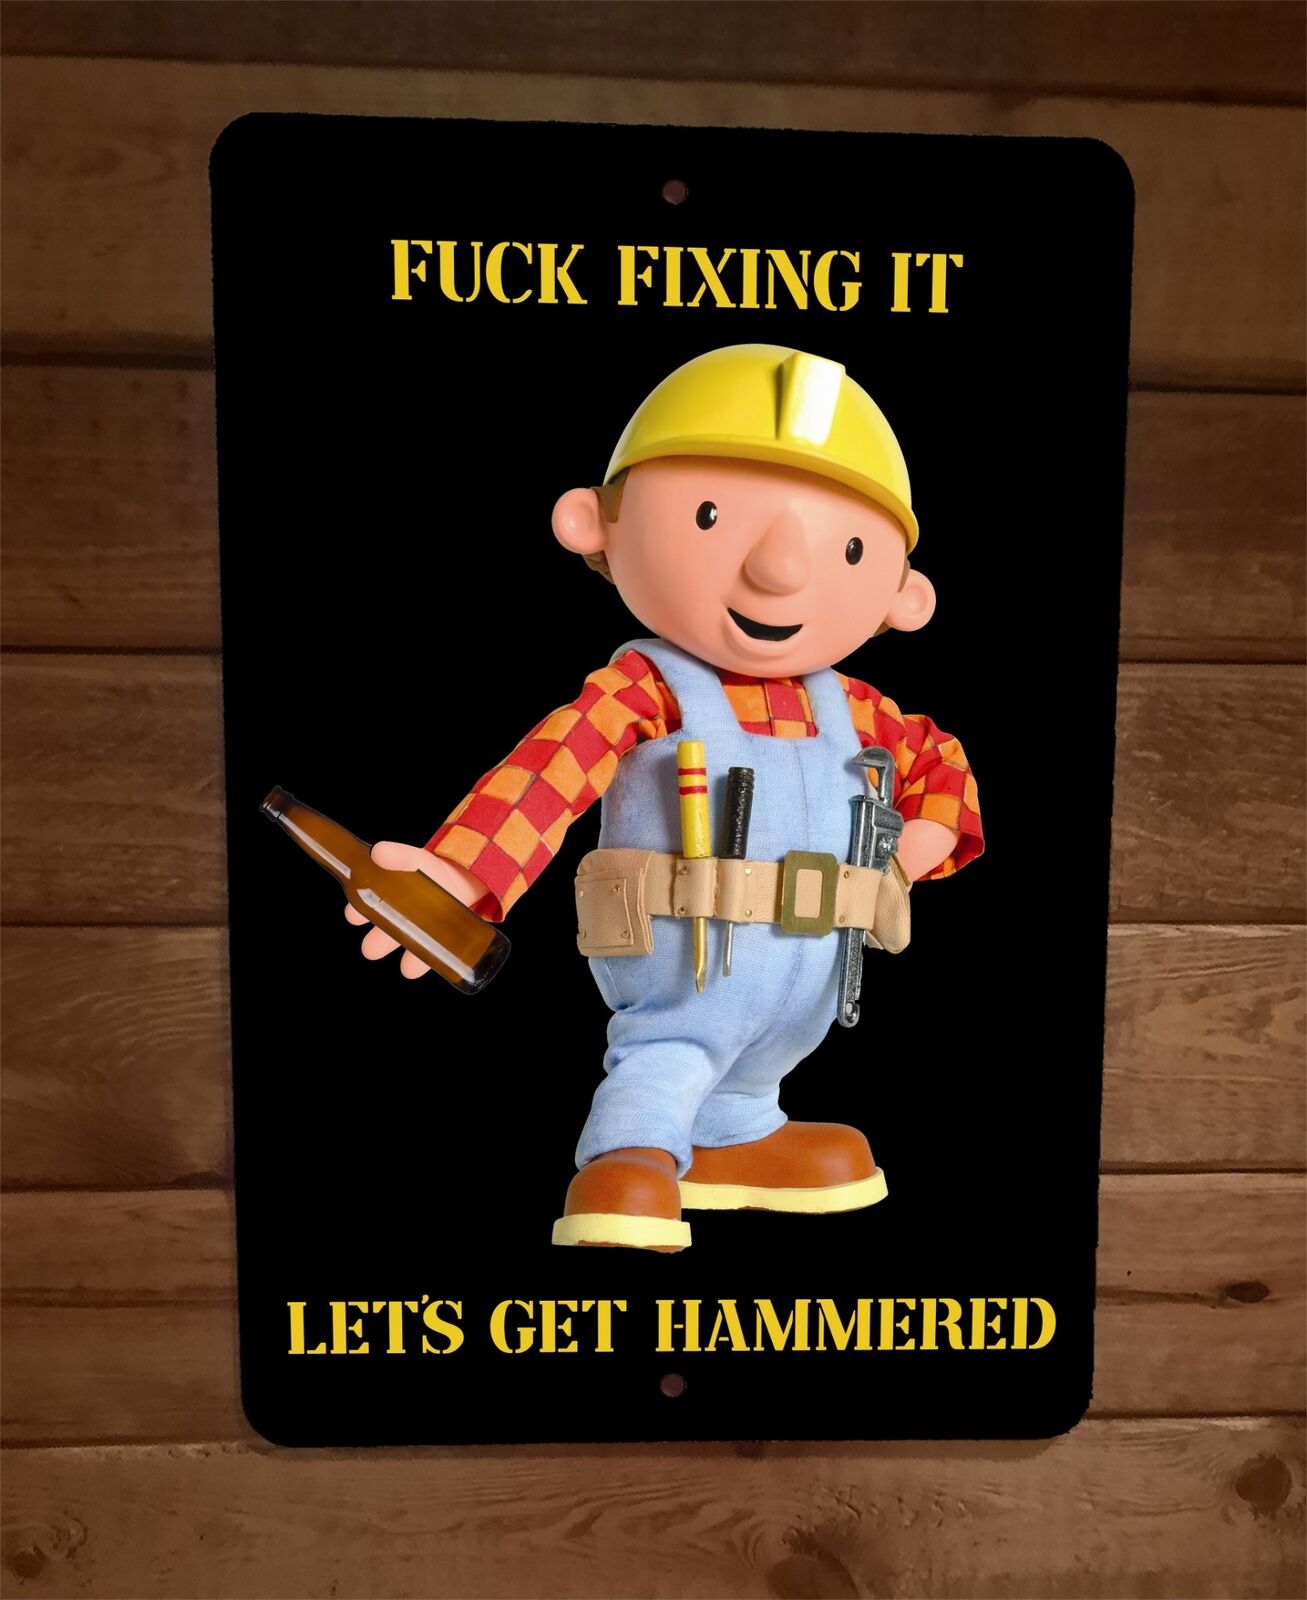 Fuck Fixing it Lets Get Hammered 8x12 Metal Wall Sign Bob the Builder Beer